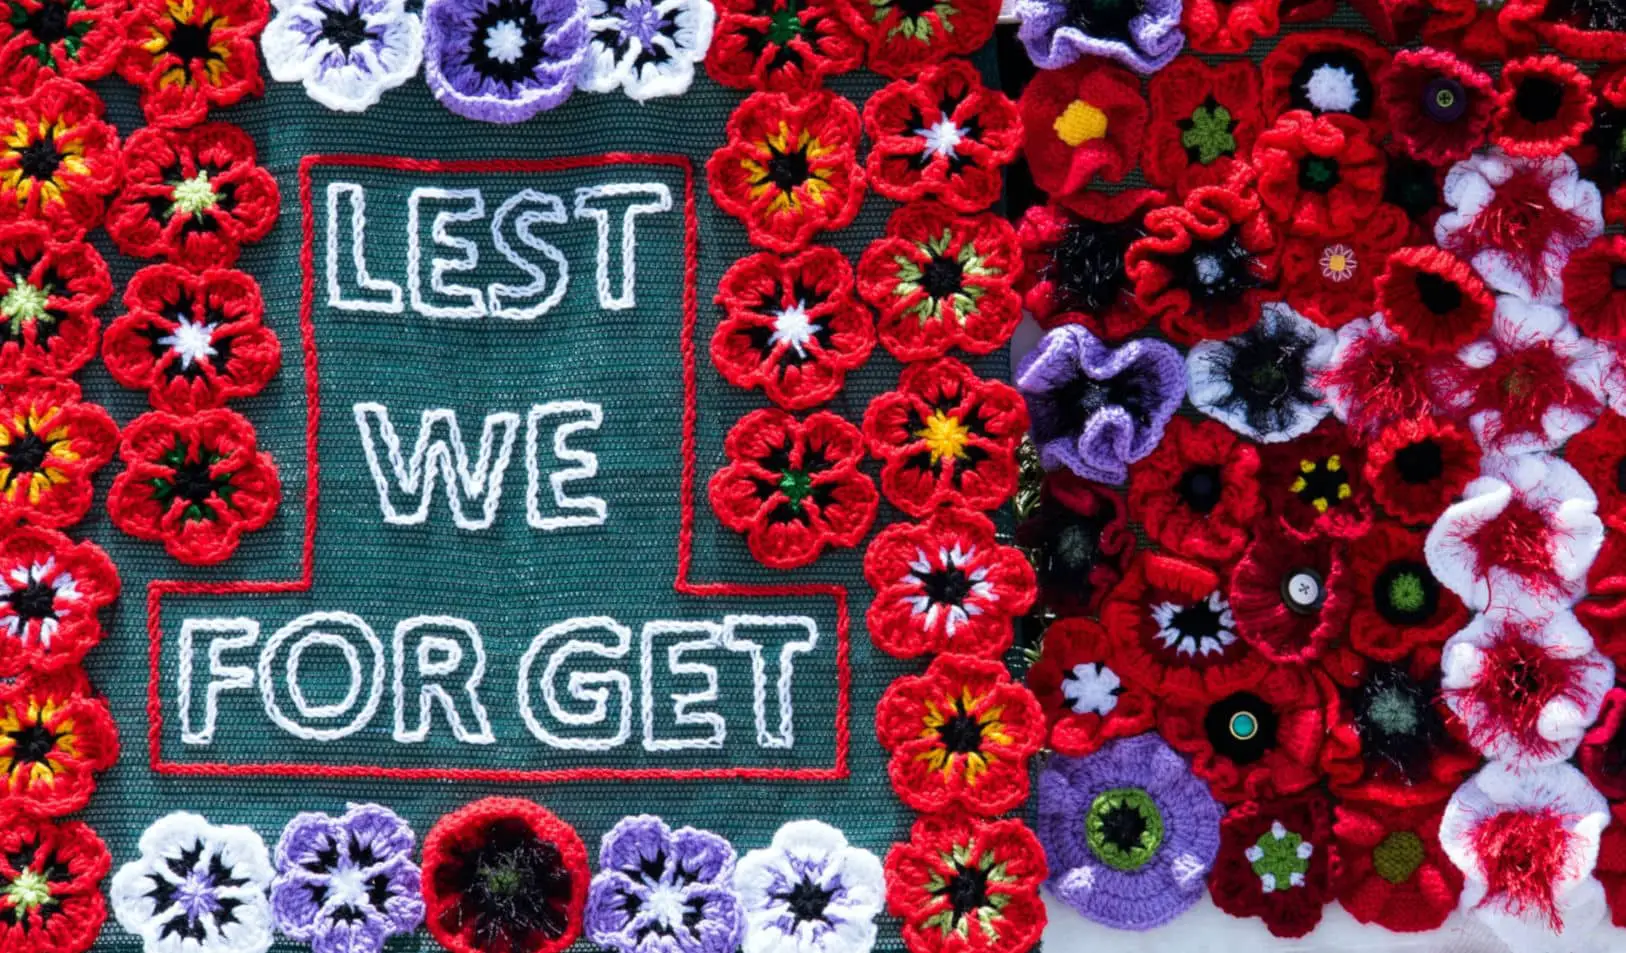 crocheted Lest we Forget sign